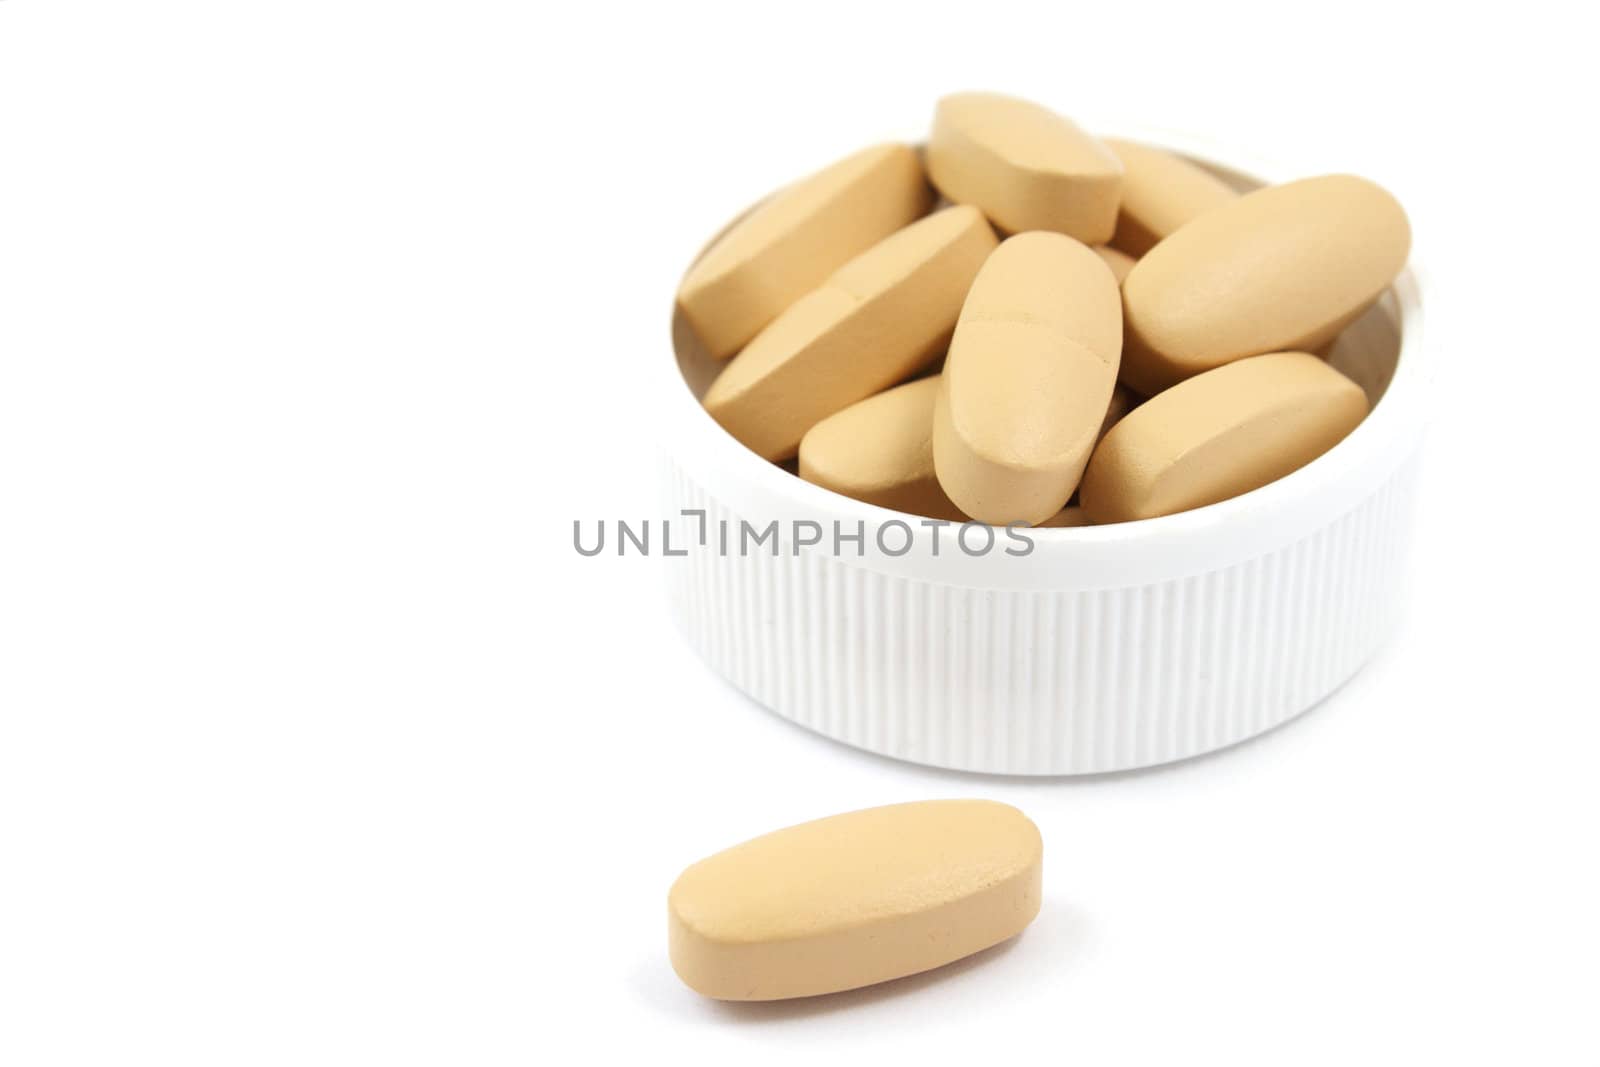 Multivitamin pills in the white plastic cap isolated on white background